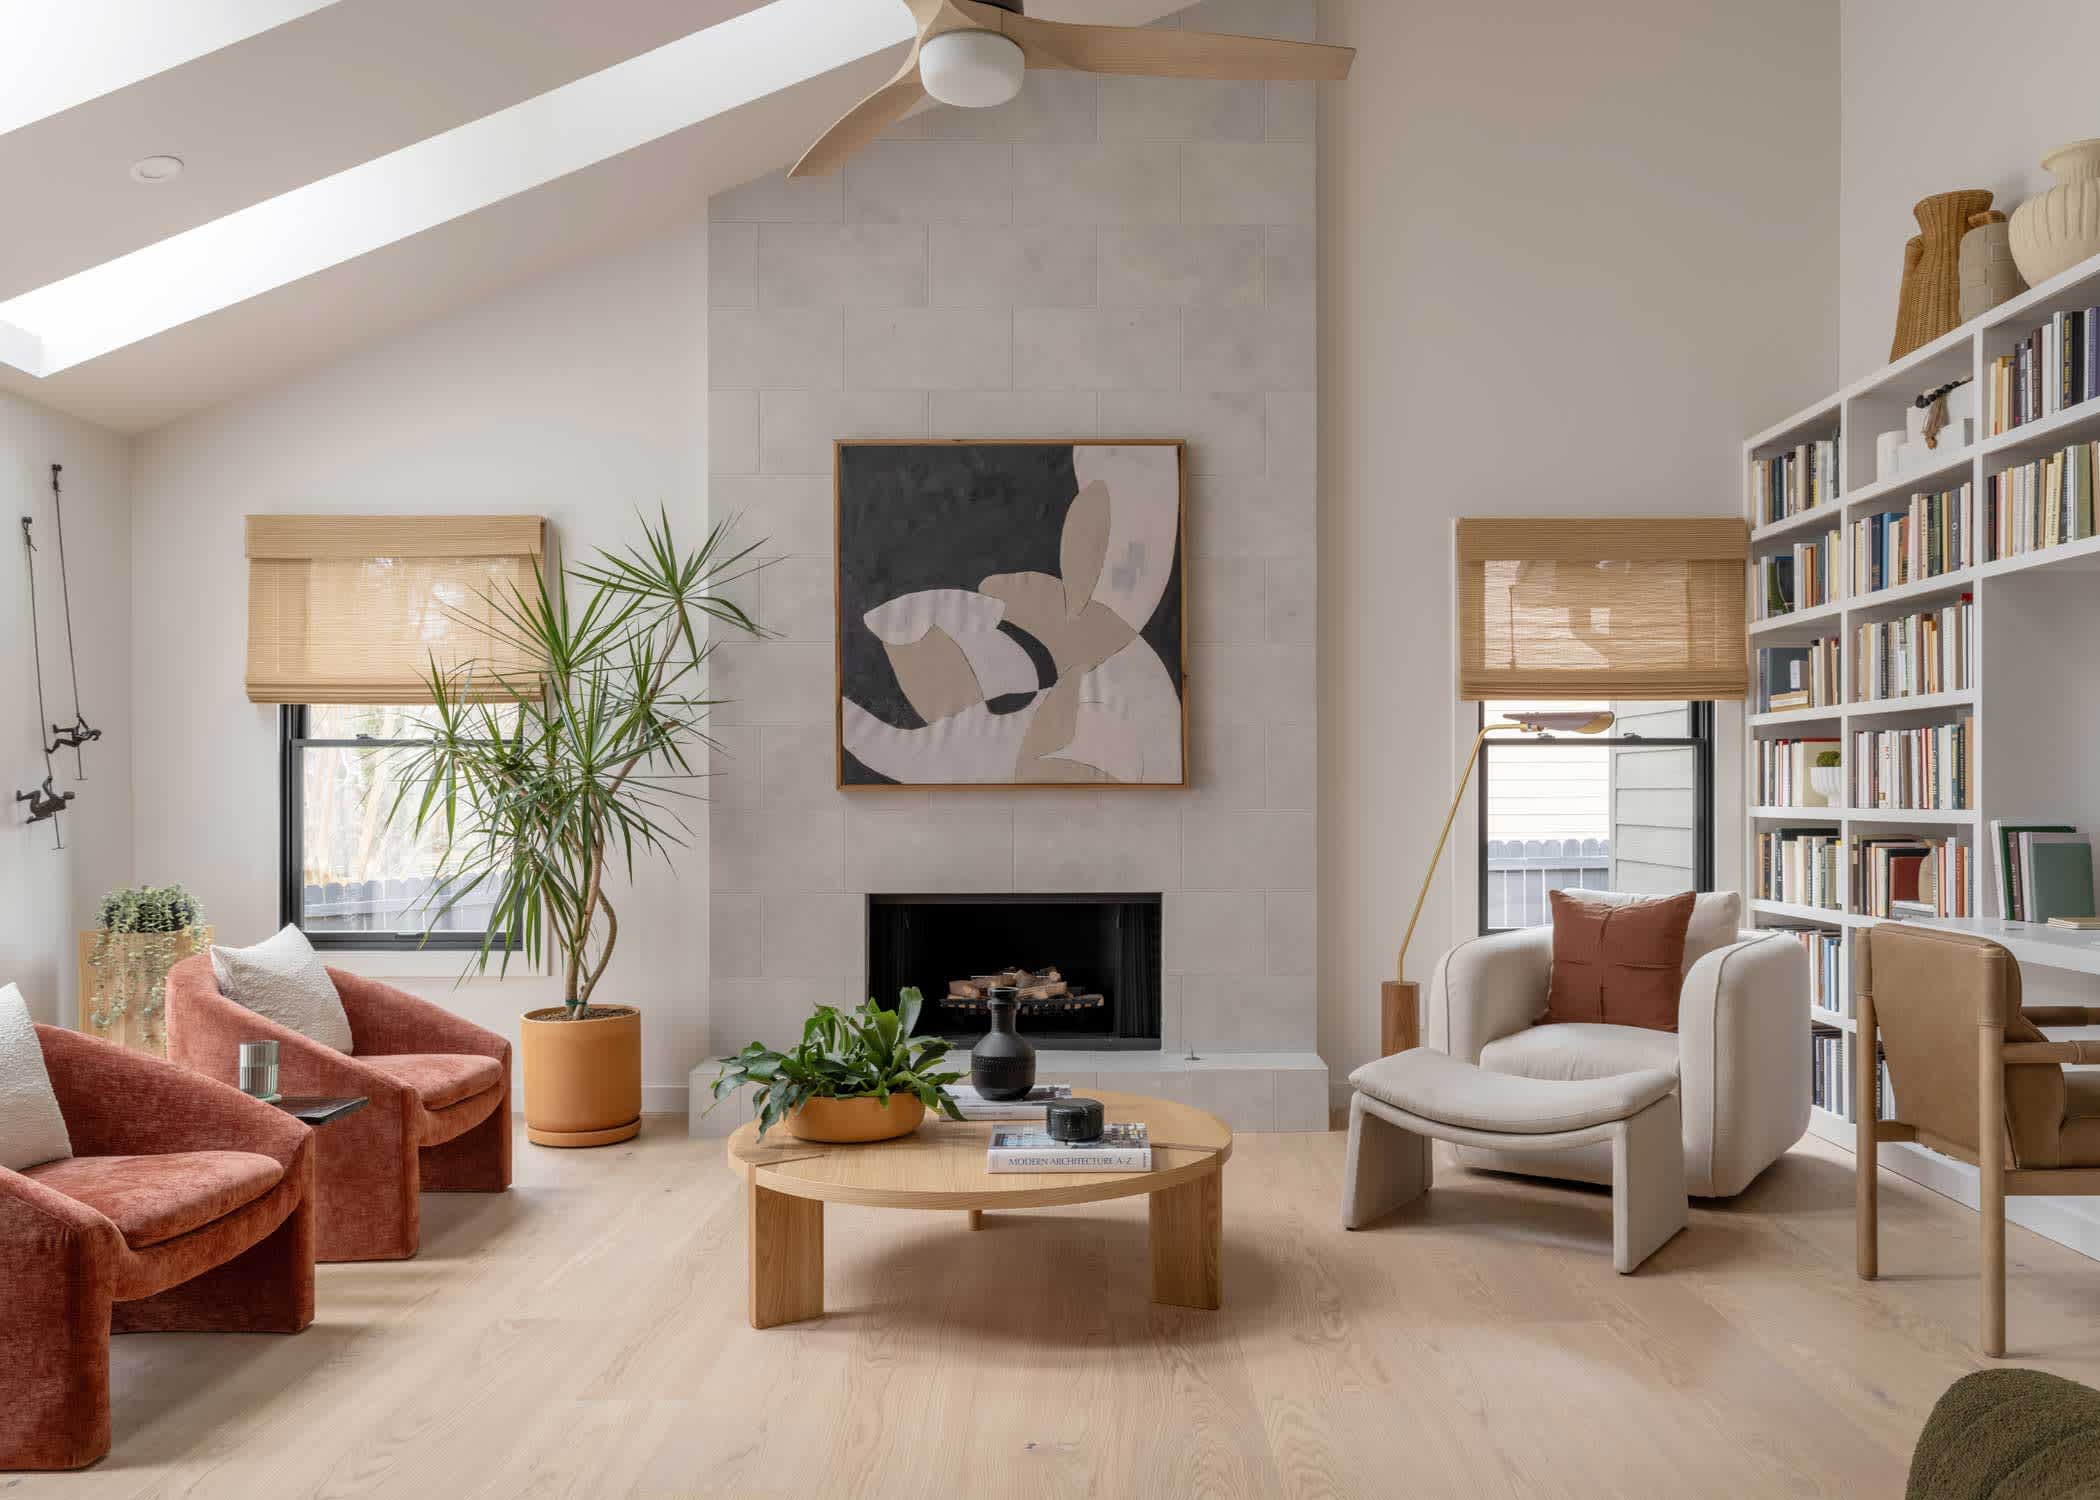 Lagan River White Oak Engineered Hardwood Flooring 2024 HGTV Smart Home living room with Cemento Lucido Porcelain tile on fireplace face and dark rust upholstered chairs plus beige upholstered chair and built in bookcases